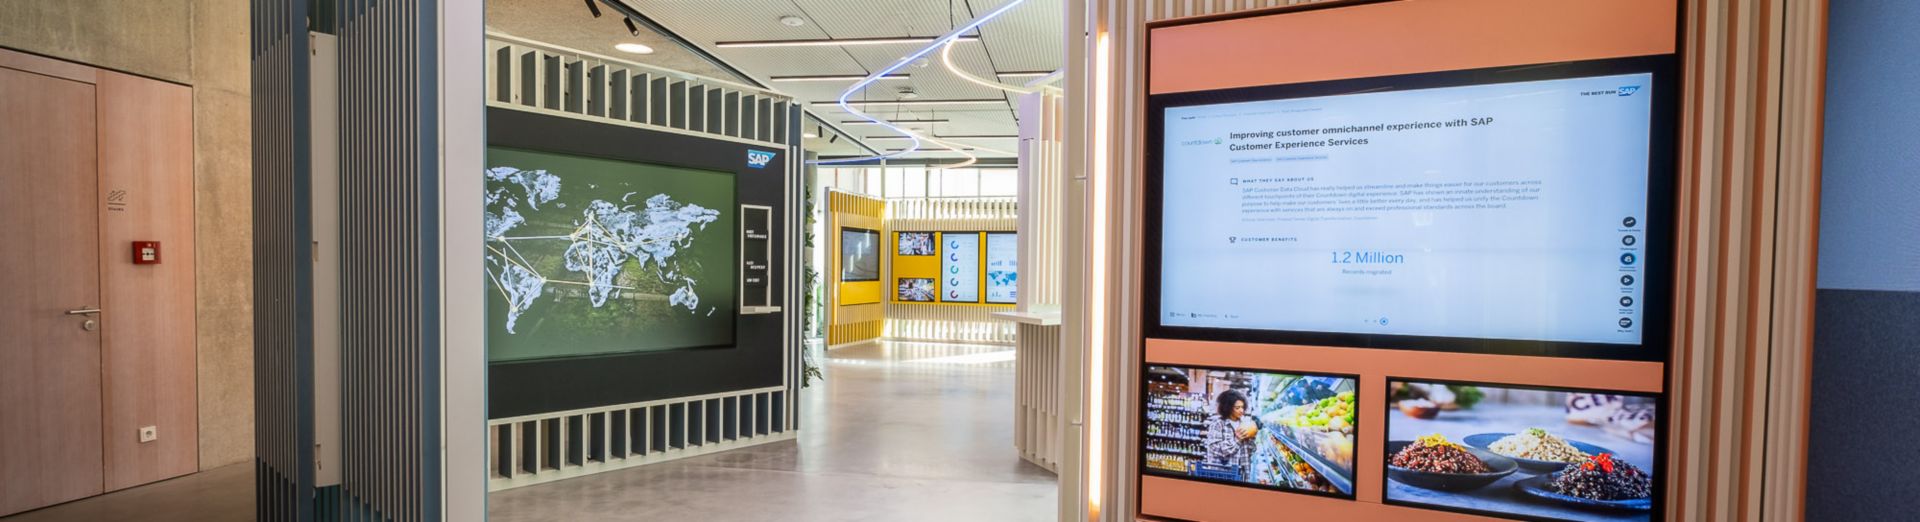 view inside SAP Experience Center Walldorf with large screen displays